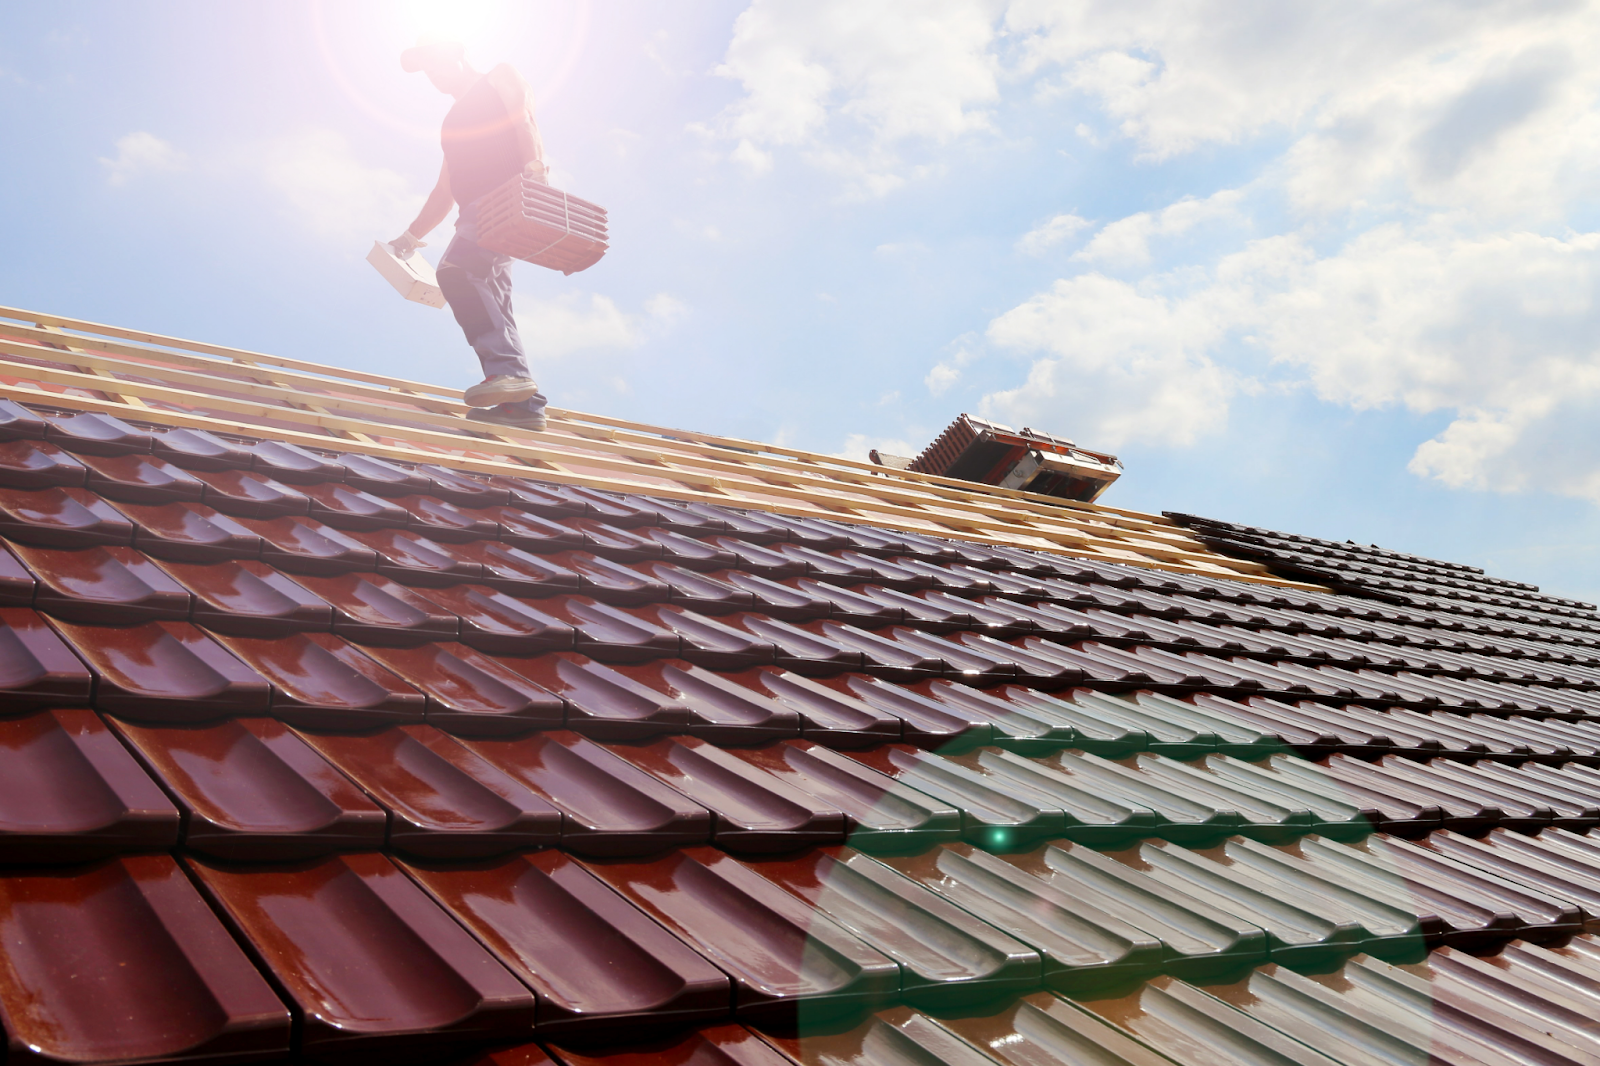 Get the Best Roofing For Your House from Reliable Contractor